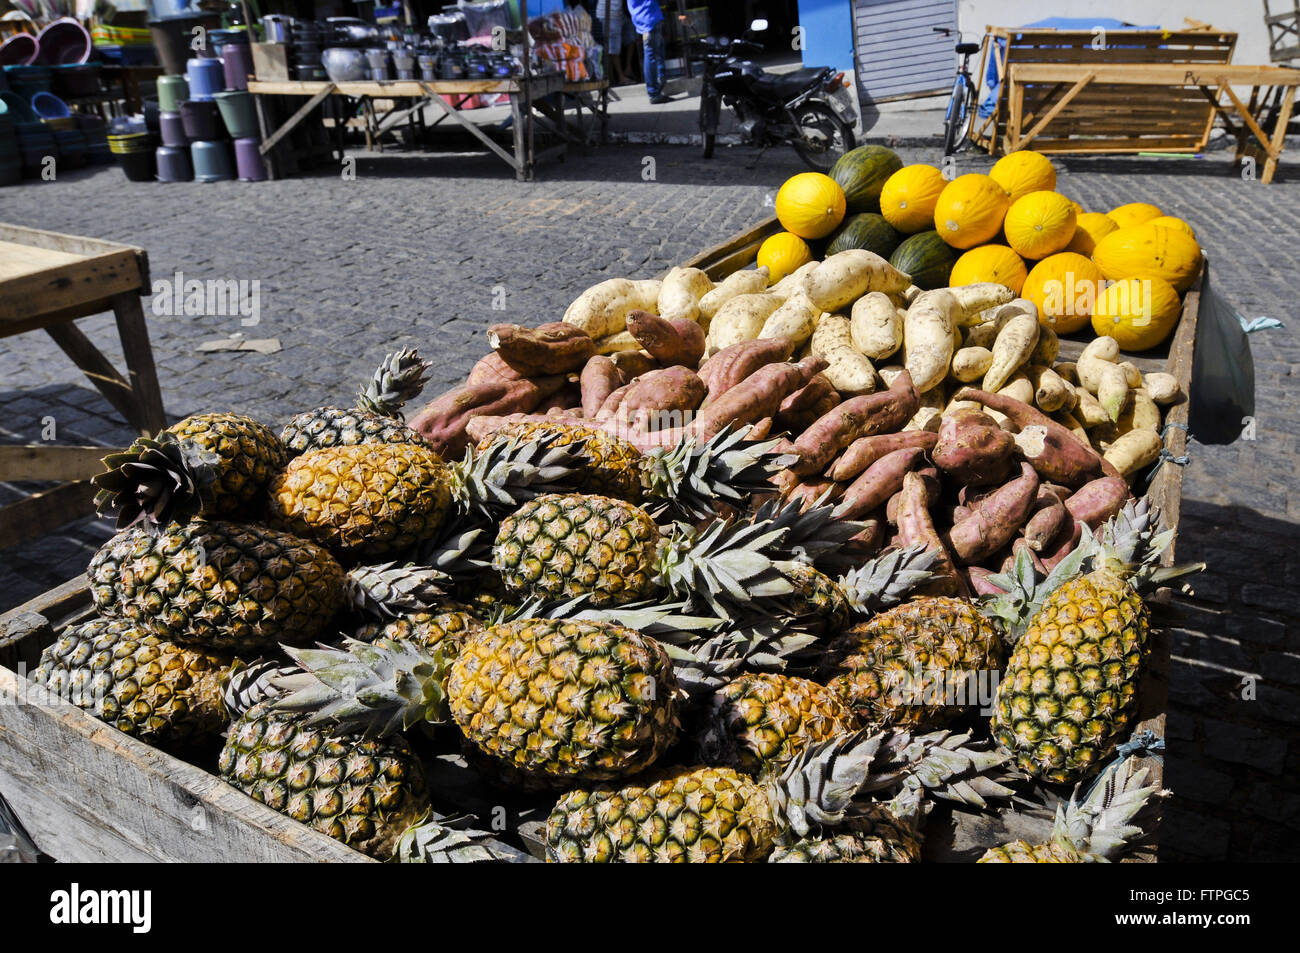 Trade of fruits and vegetables in the city center - the rough region Stock Photo